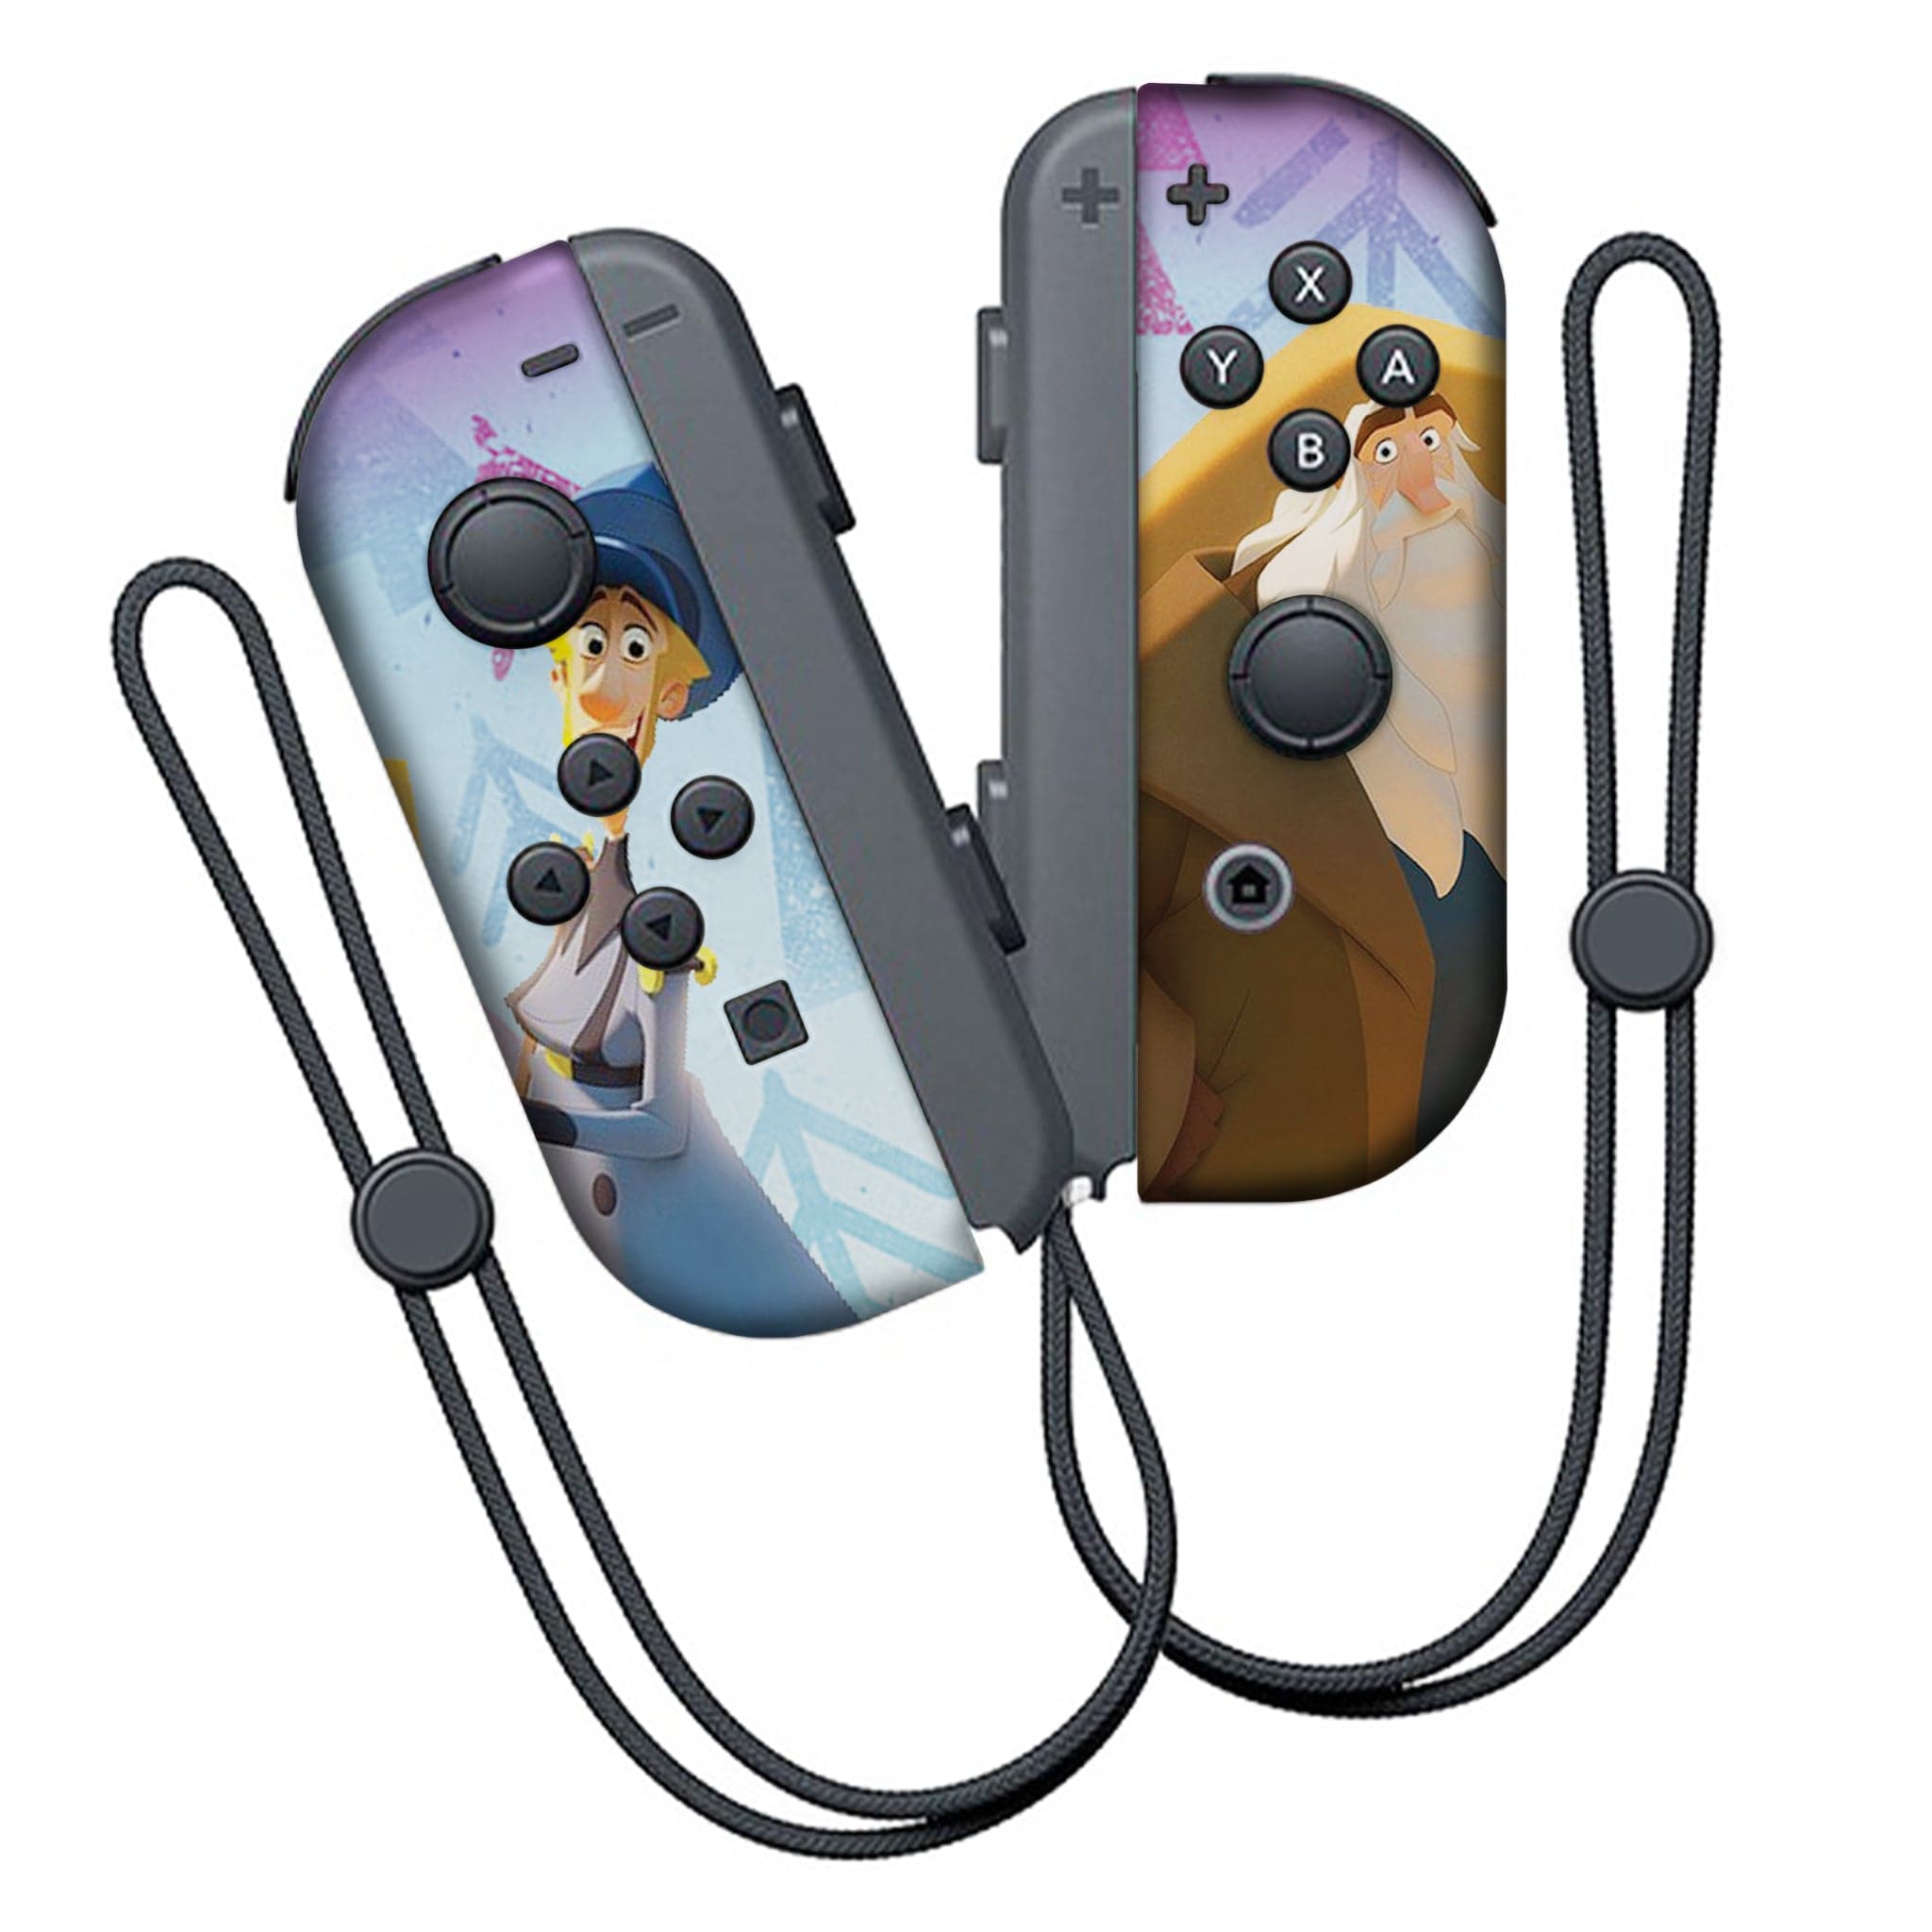 Klaus Joy-Con Left and Right Nintendo Switch Controllers